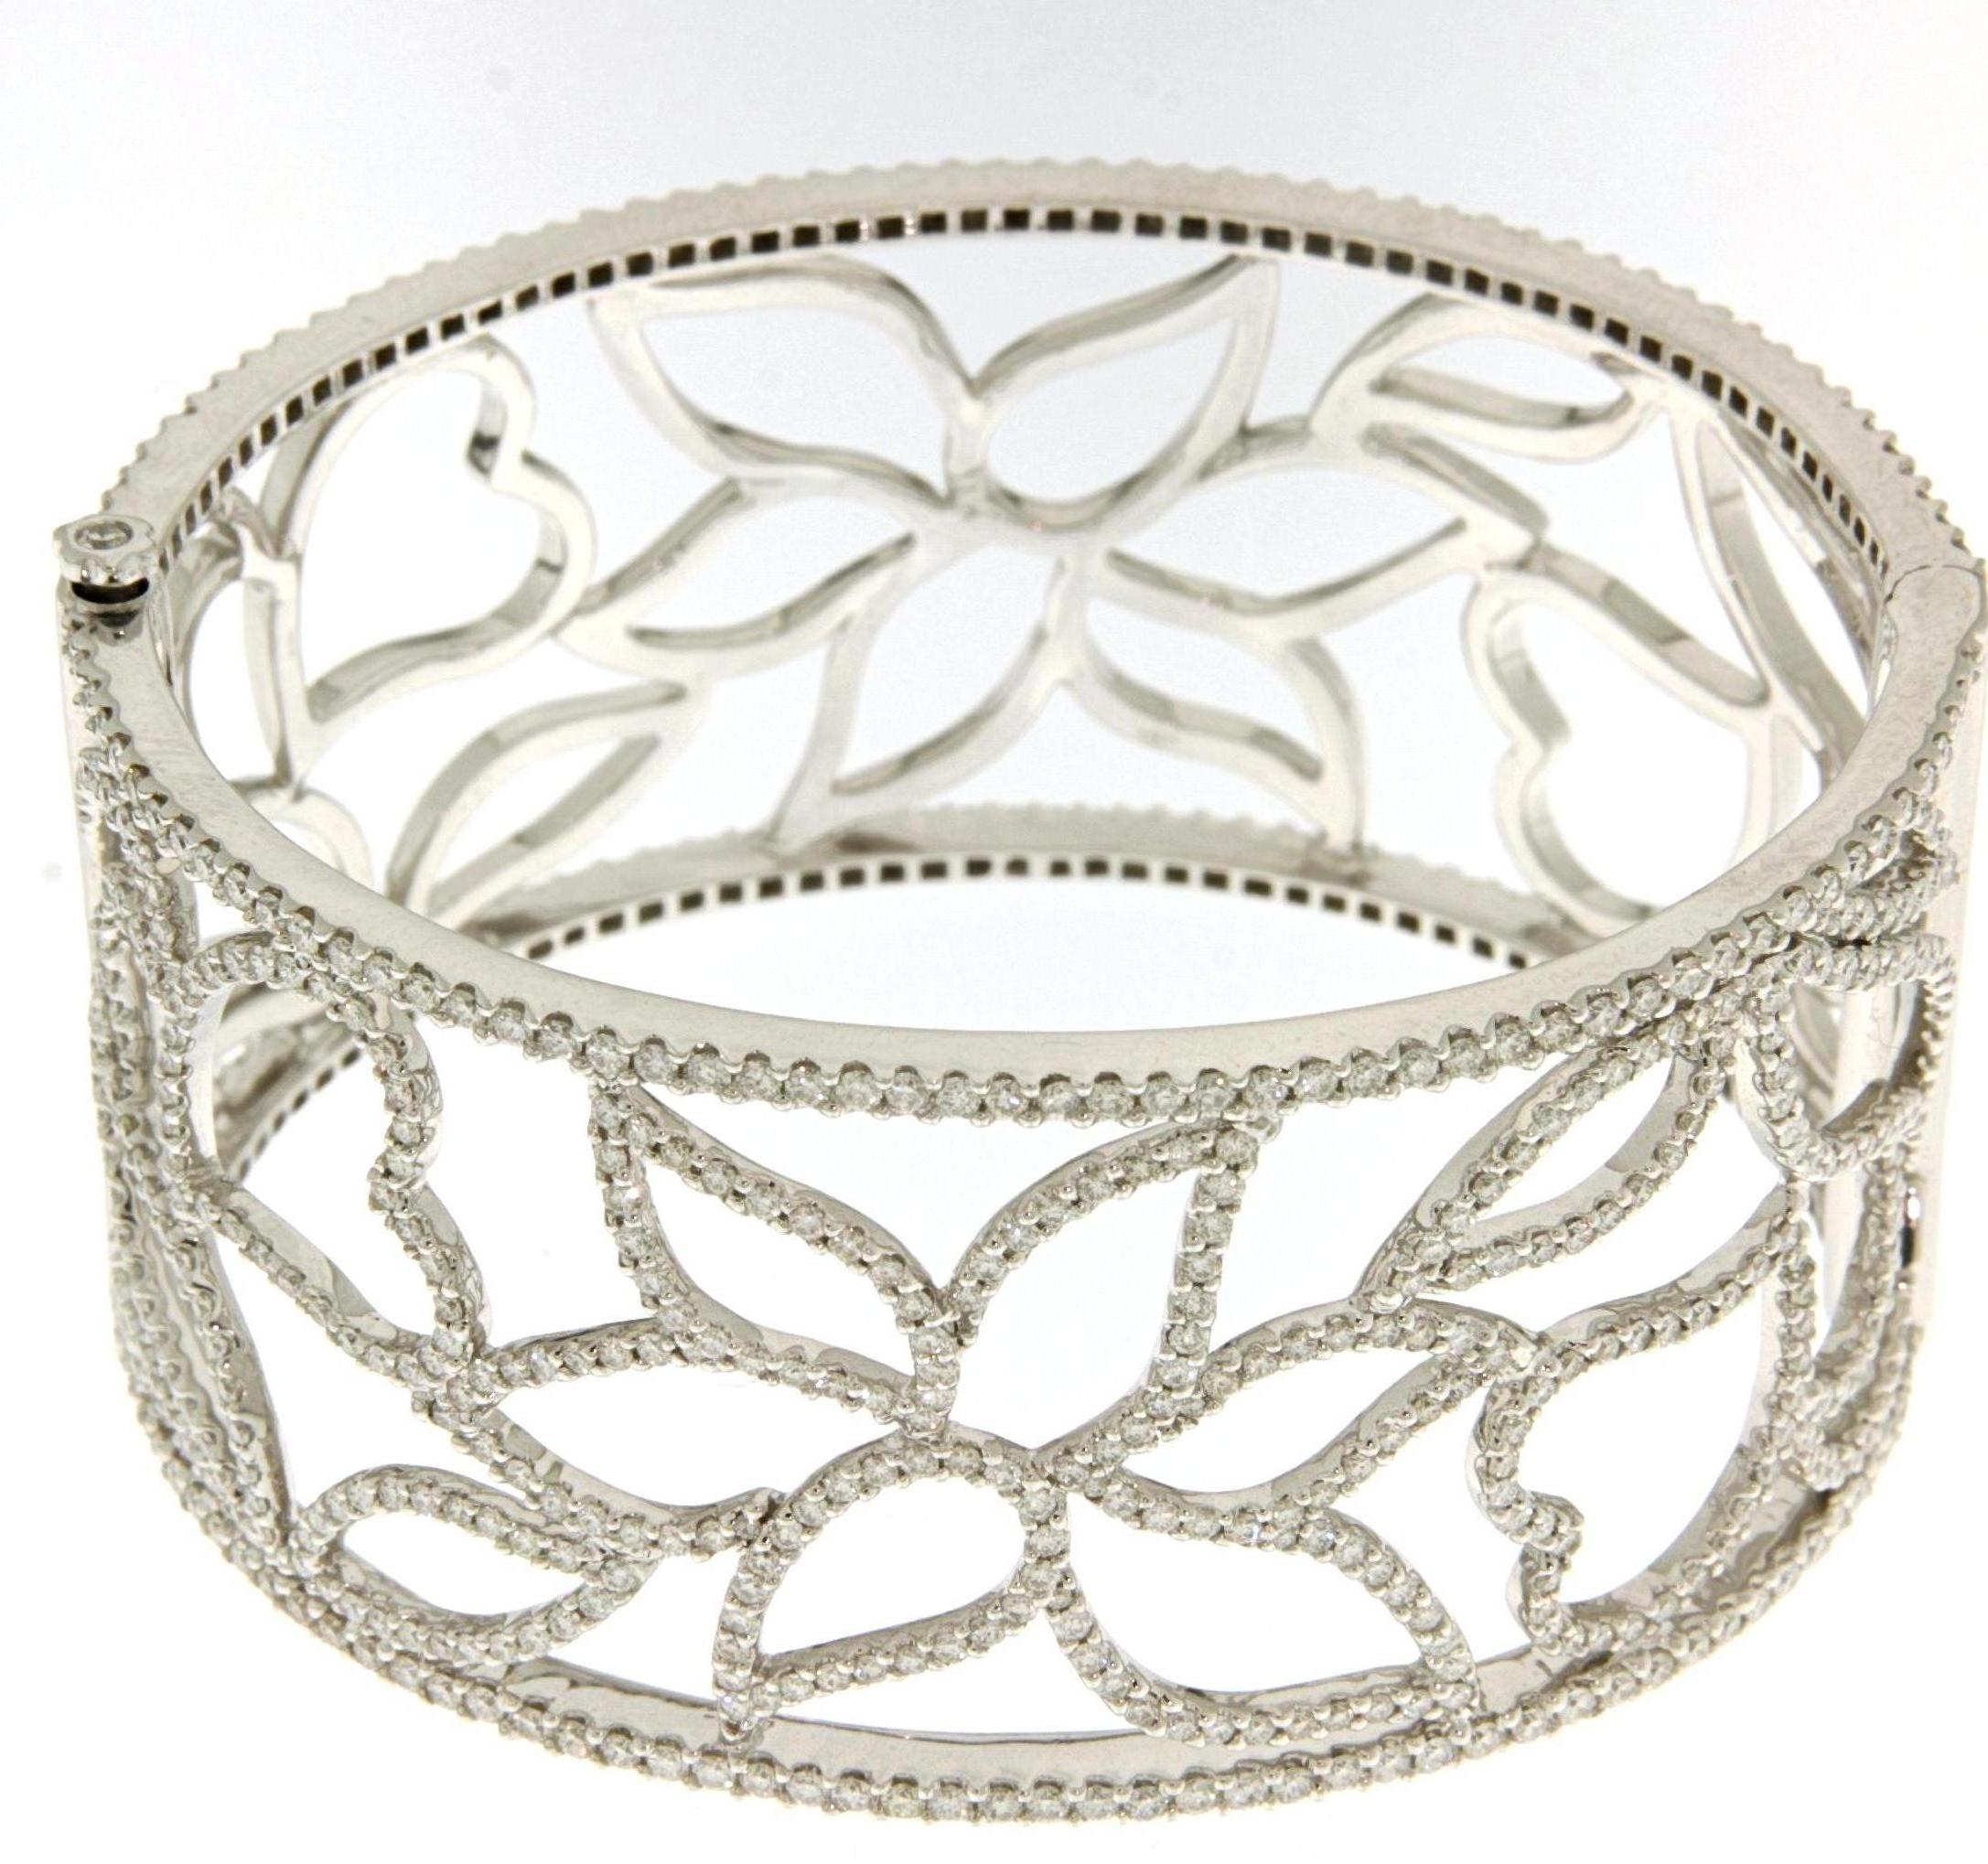 Contemporary 18kt White Gold Cuff Bracelet with 5.78ct Diamonds, 2 Sided Wearable For Sale